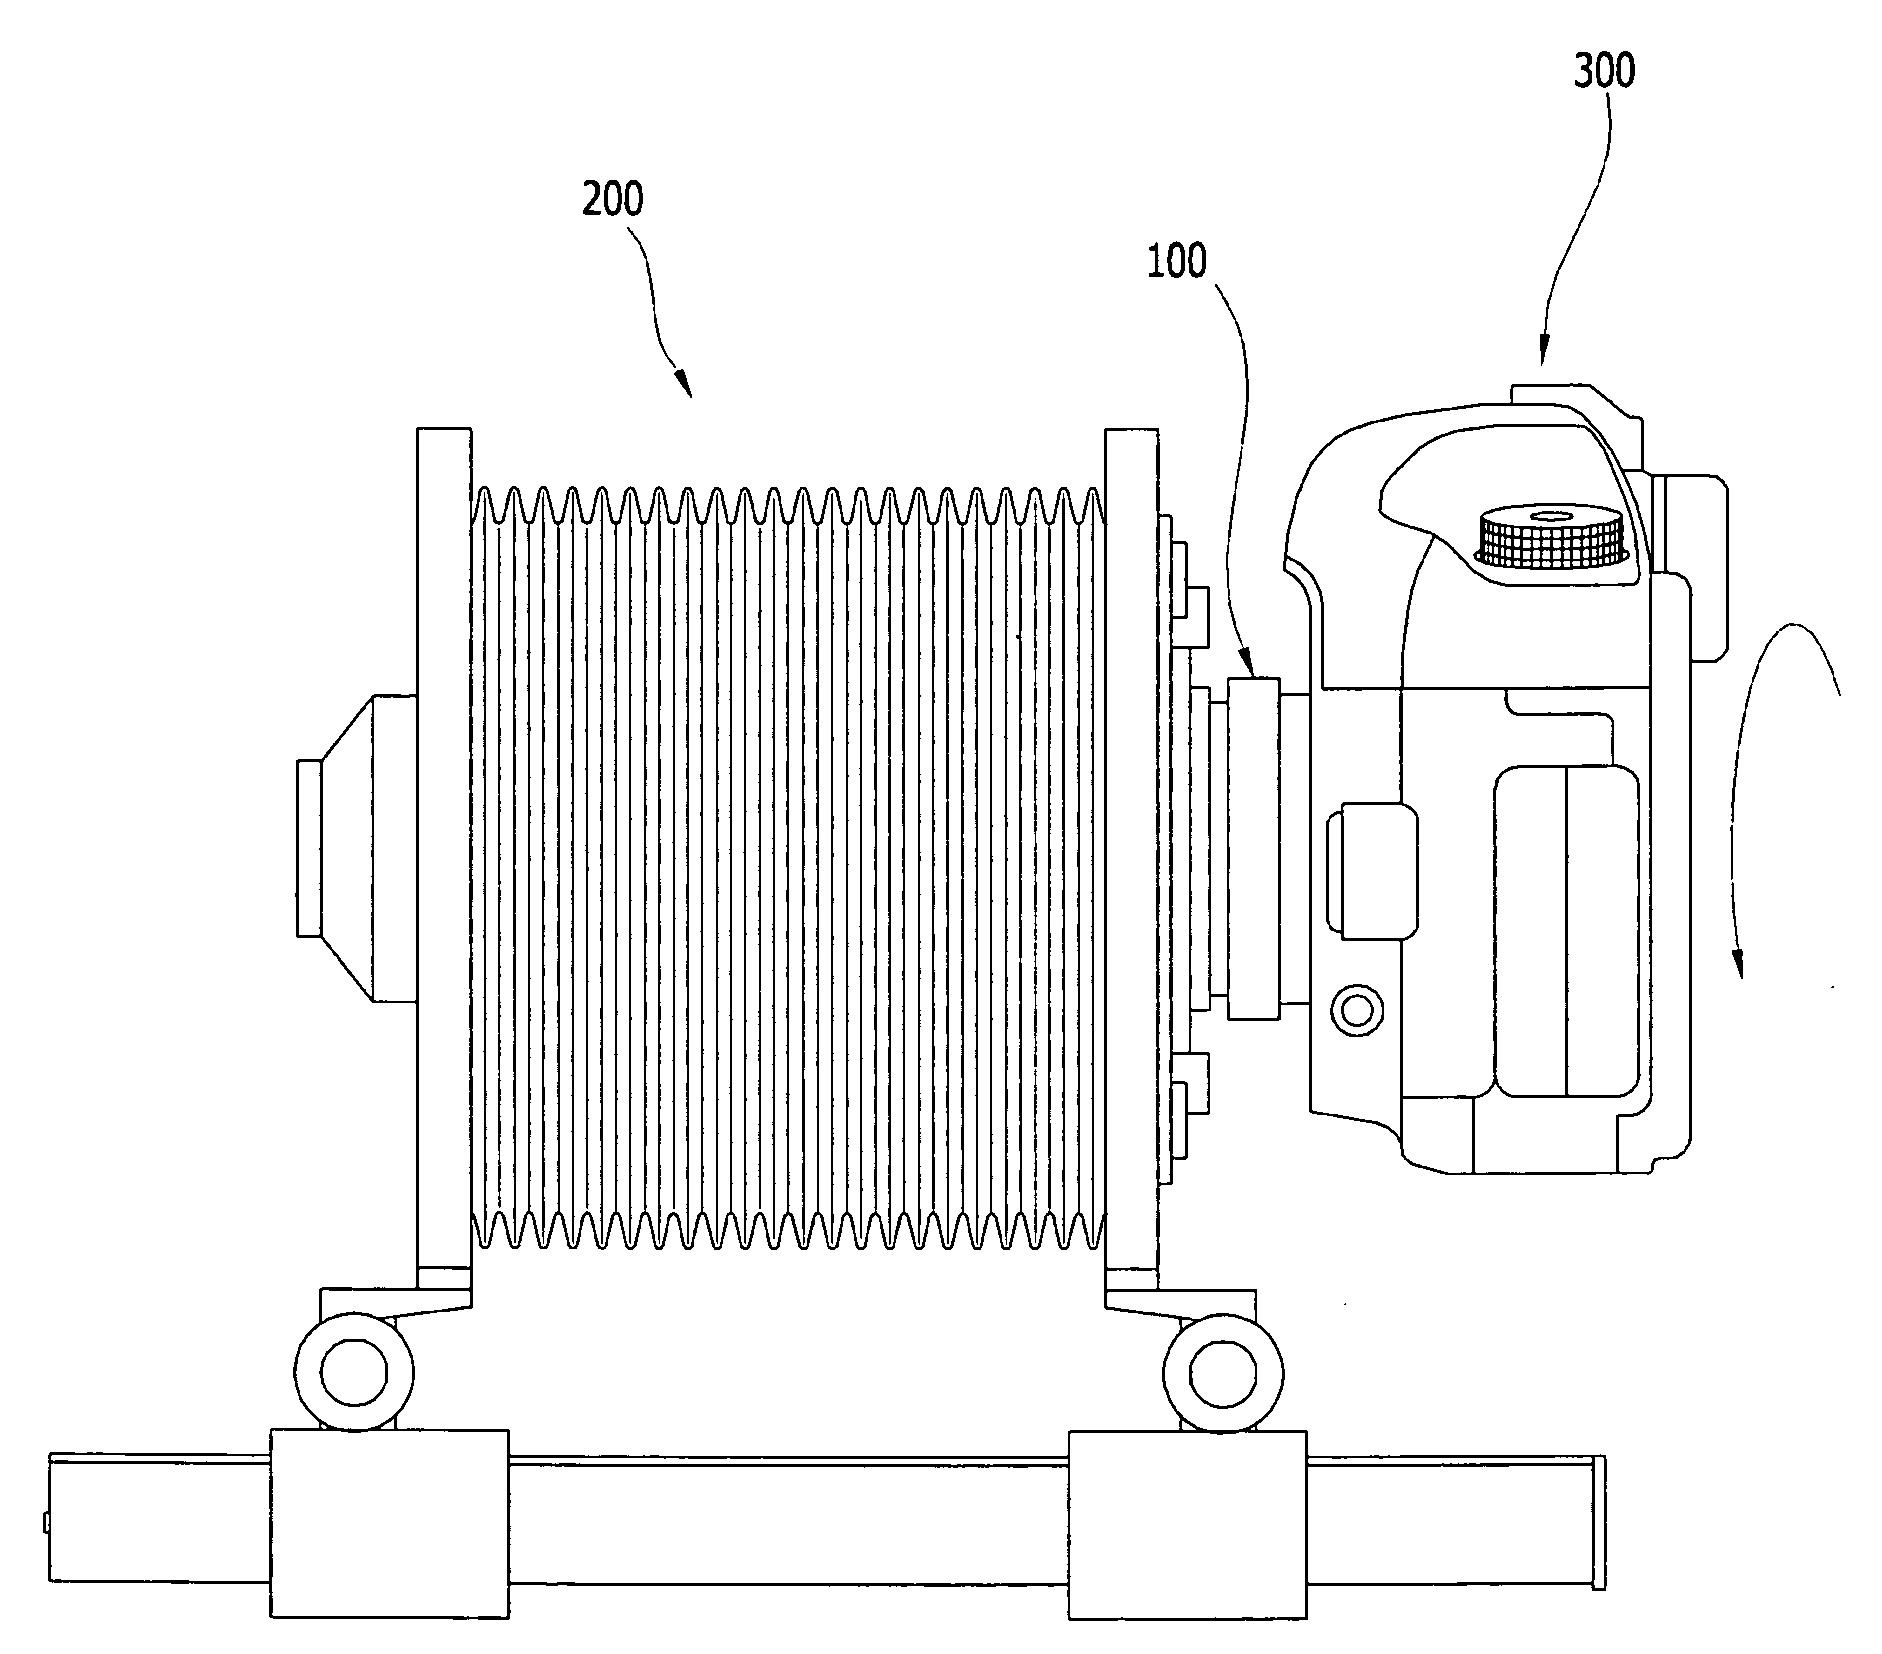 Connector panel for view camera capable of docking digital single lens reflex camera